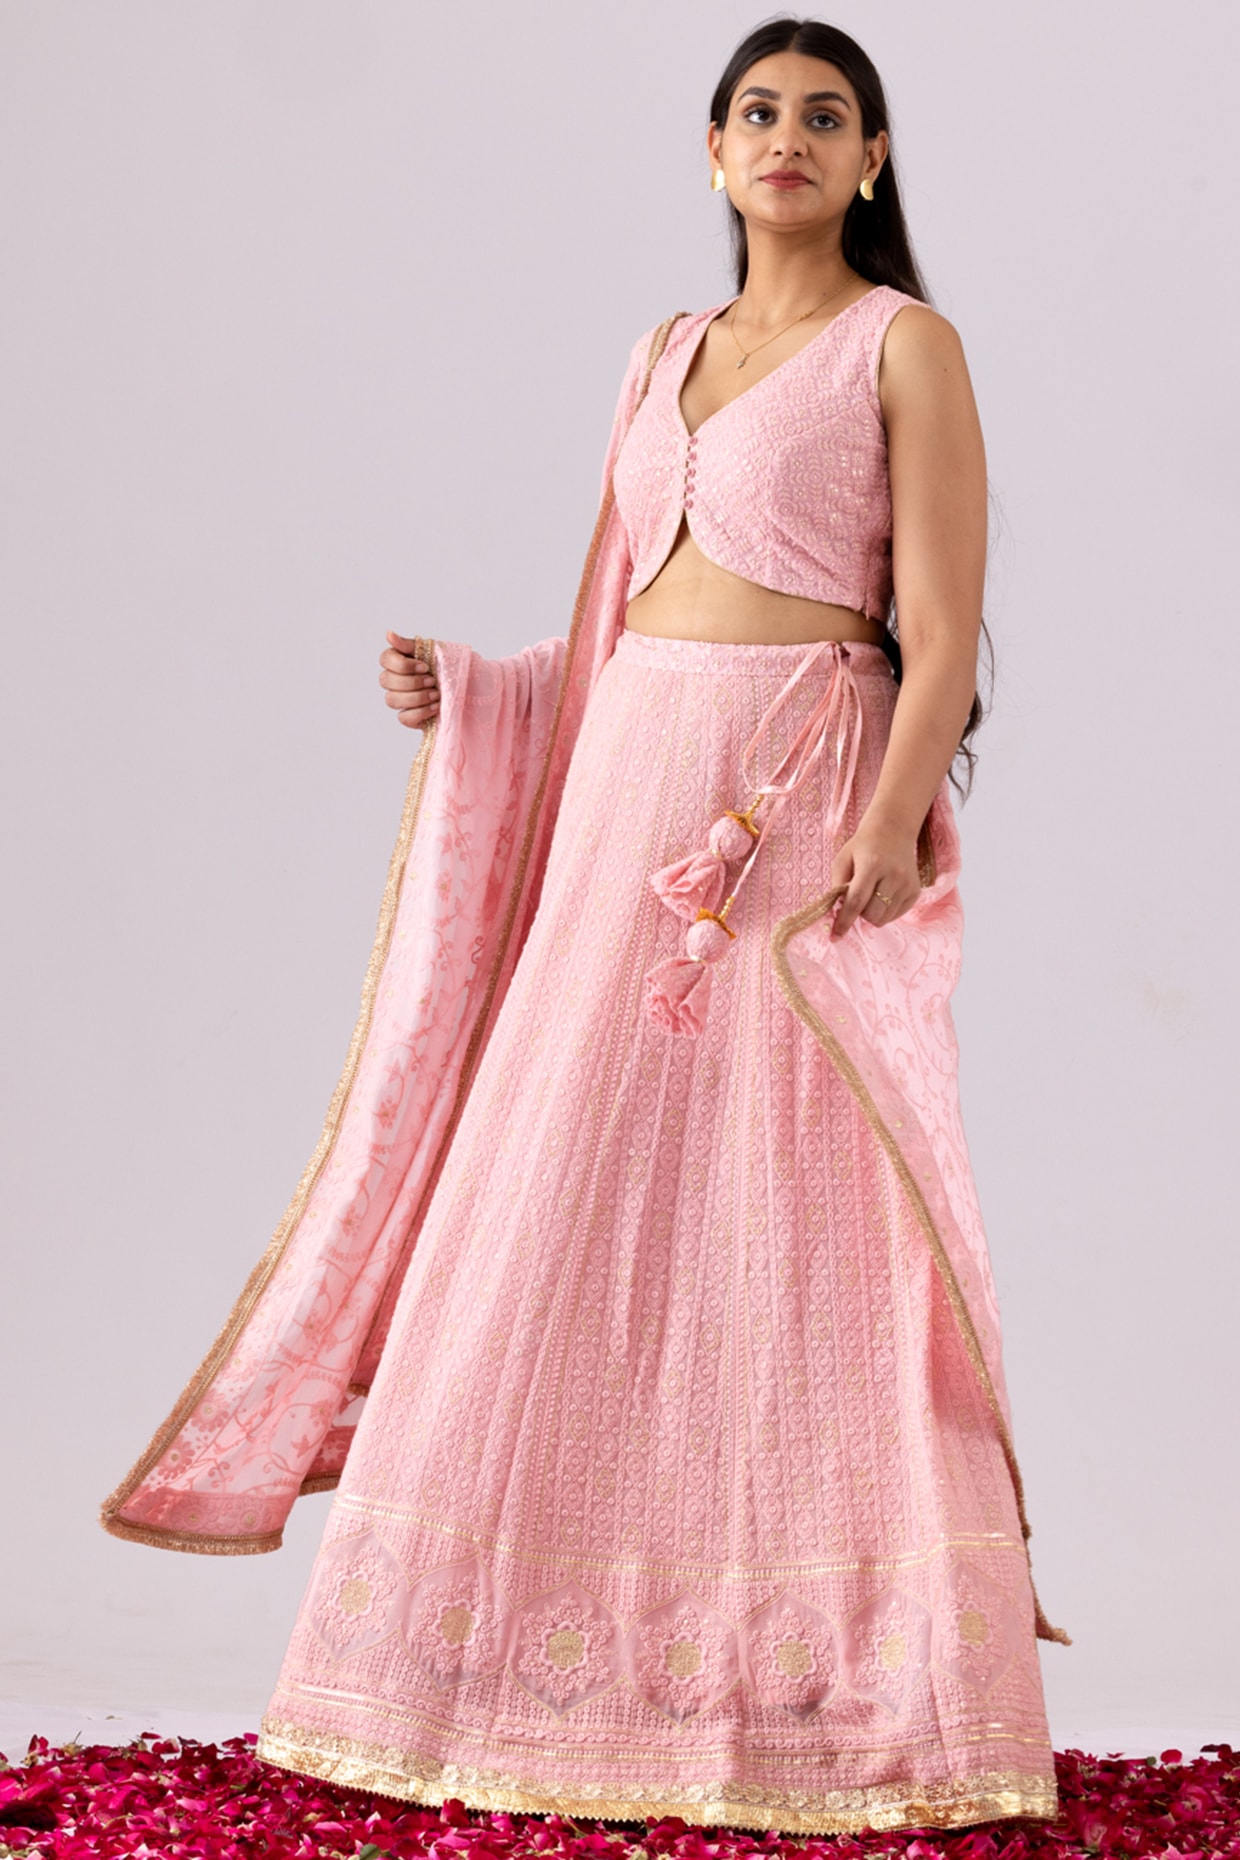 Sweet Peach Chikan Lehenga Set with Coloured Embroidered Blouse and Silver  Embellishments - Seasons India